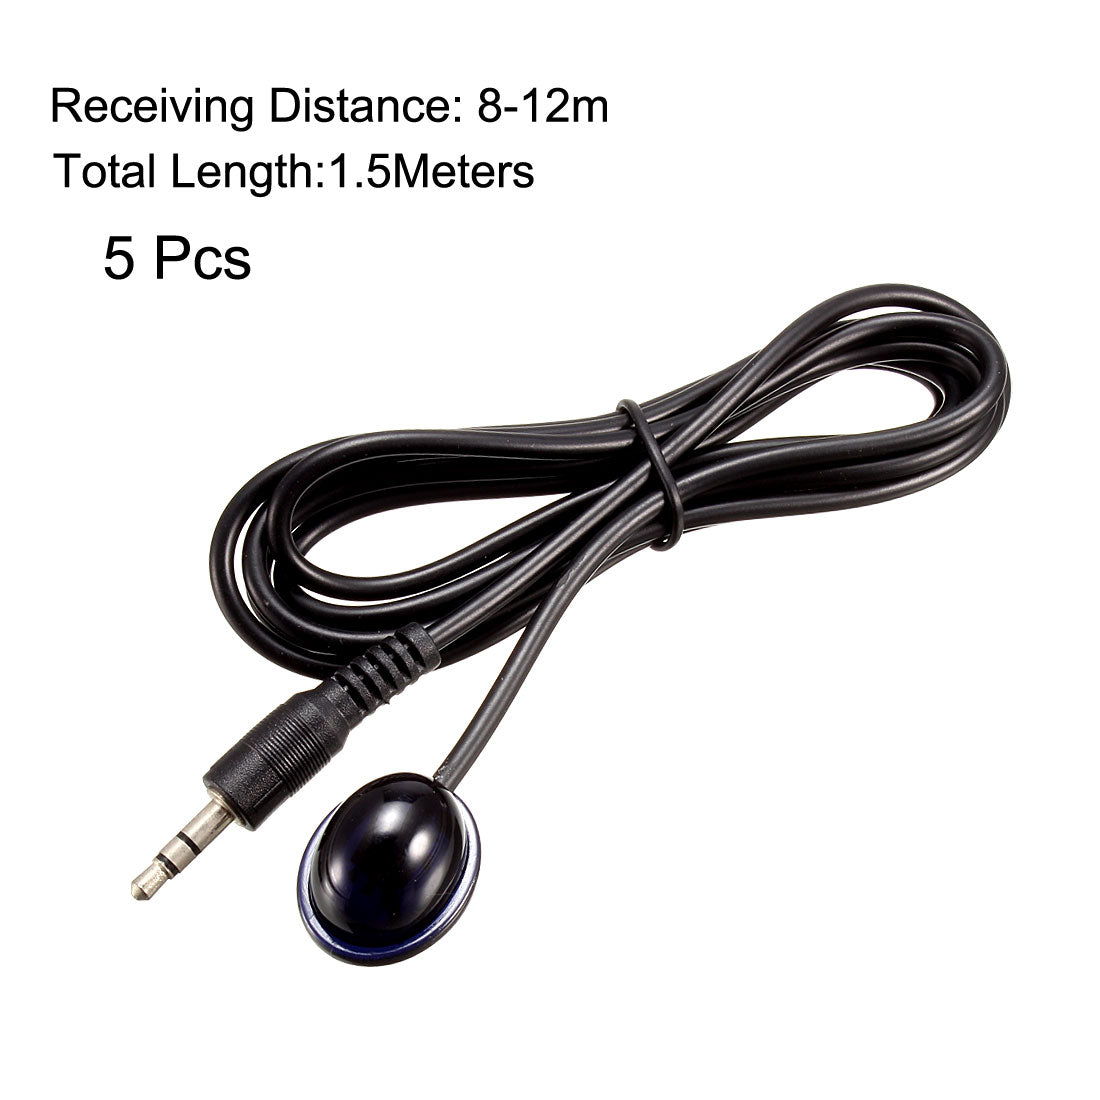 uxcell Uxcell IR Infrared Receiver Extender Cable 3.5mm Jack 4.9FT Long 26-39FT Receiving Distance Single Black Head 5pcs